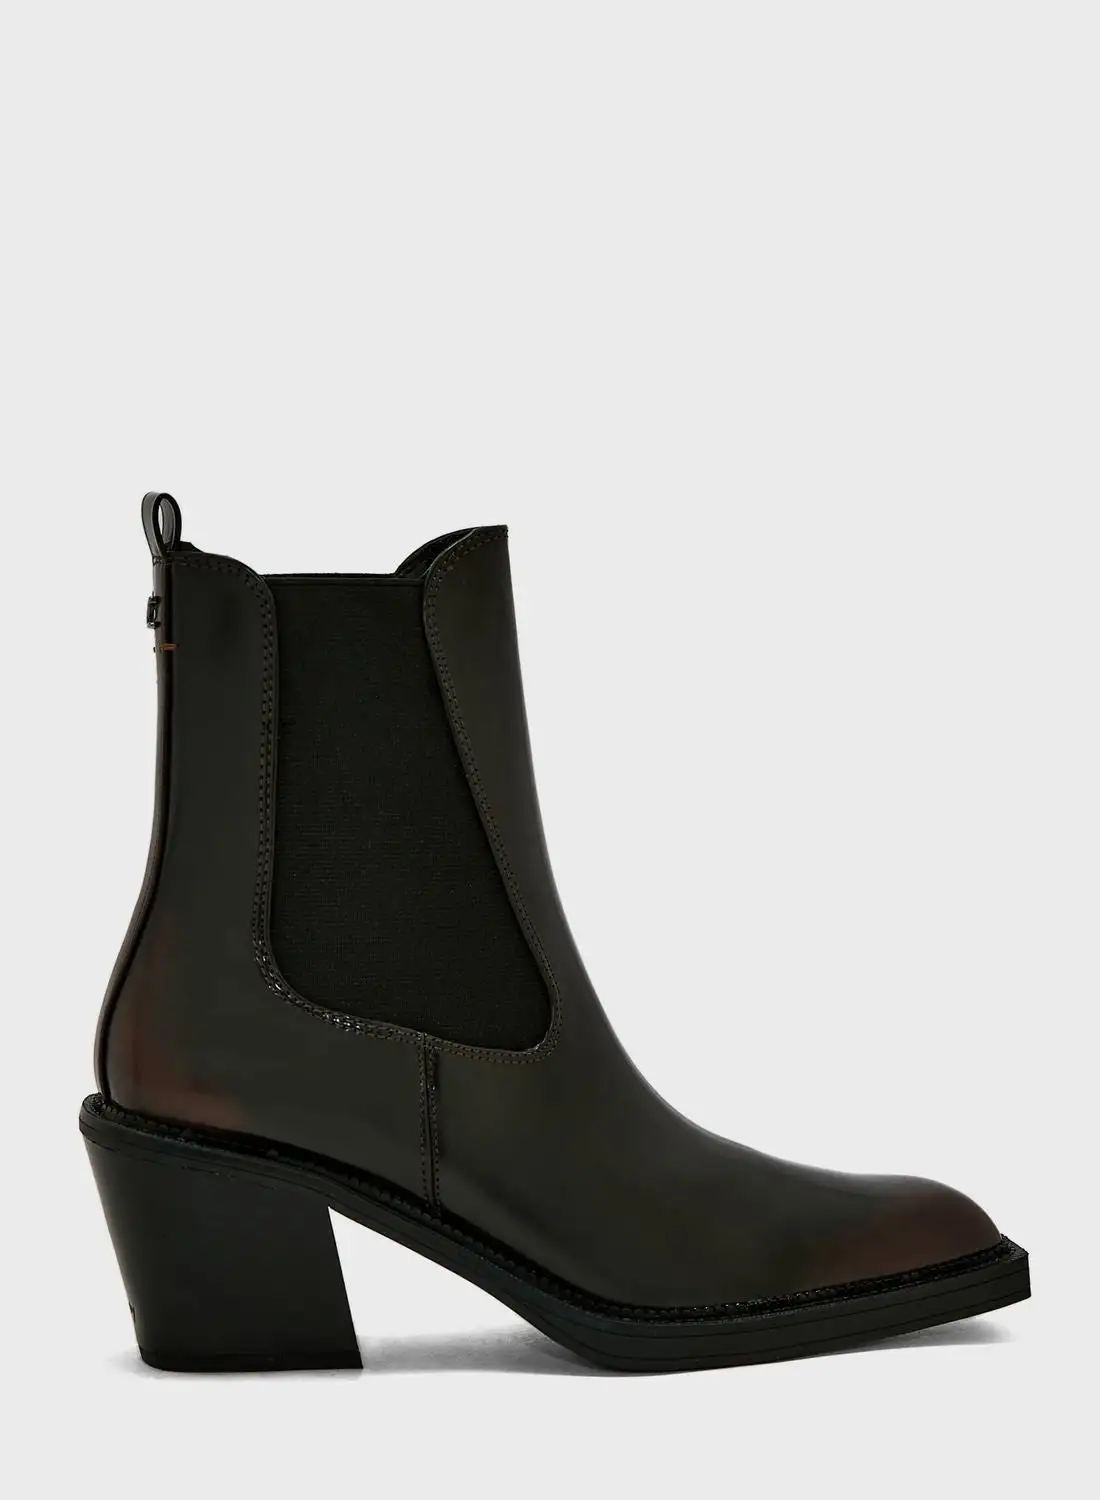 Circus NY Mindy Ankle Boots